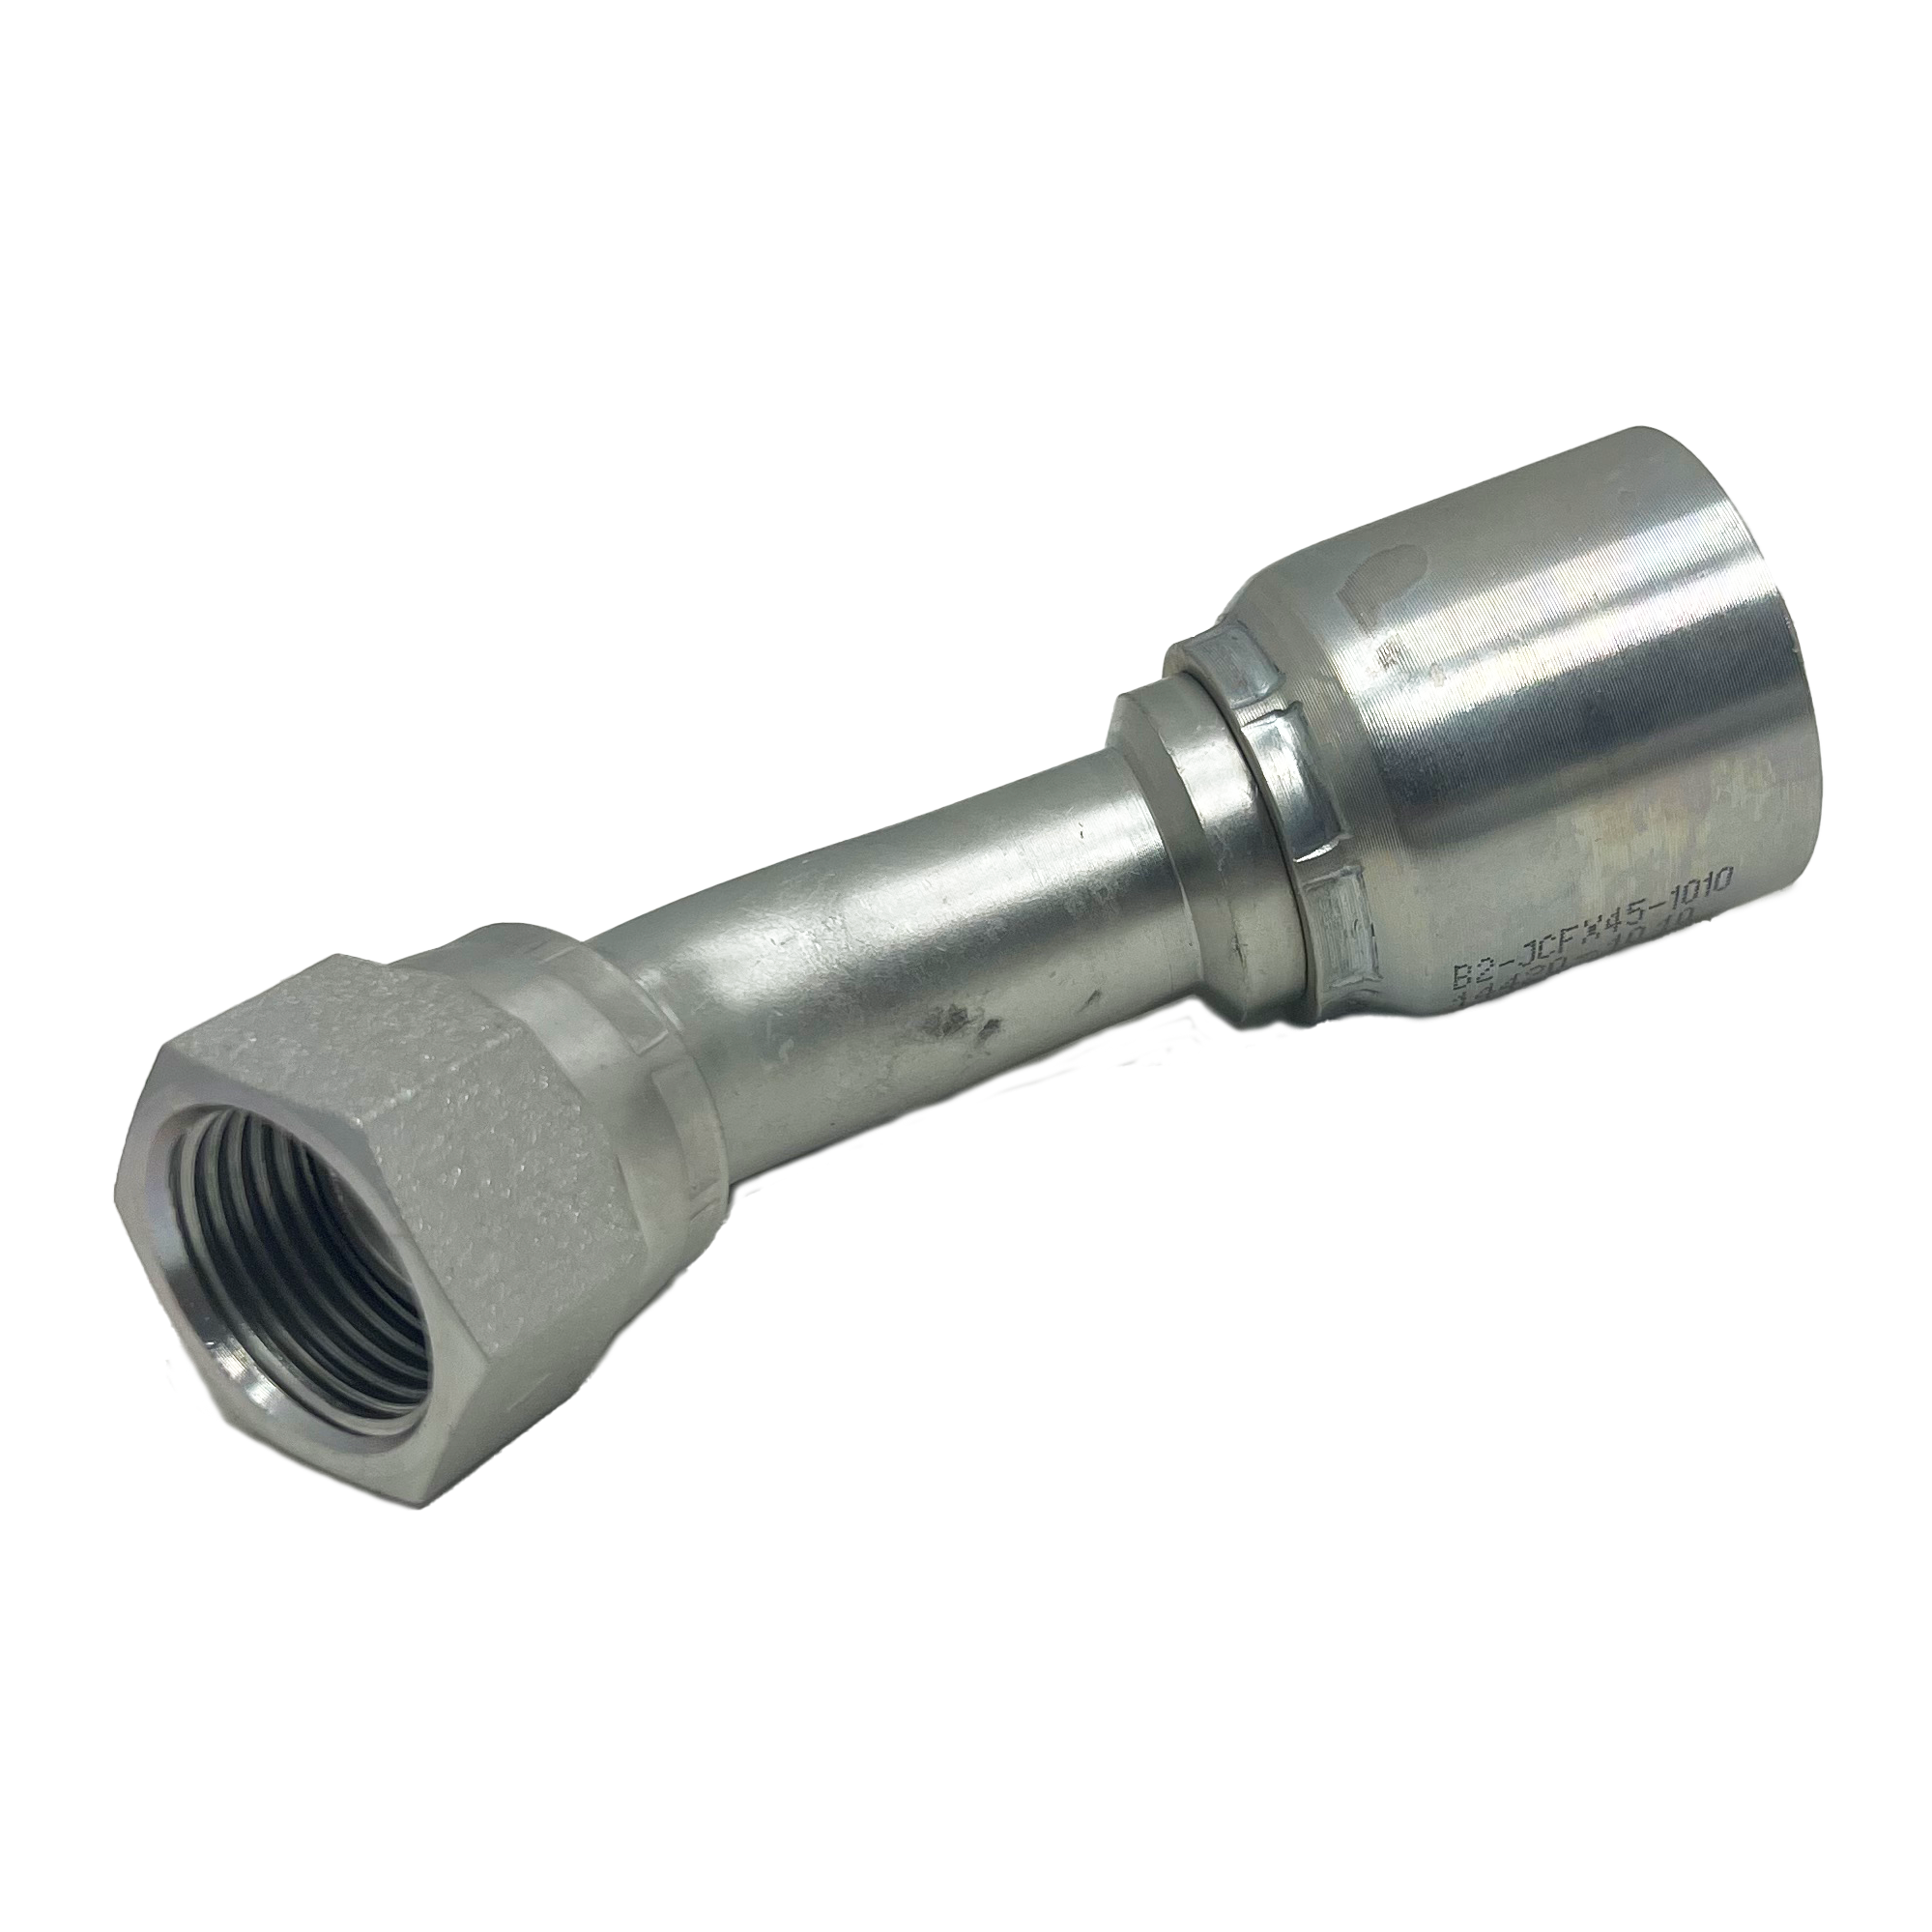 B2-JCFX45-1216: Continental Hose Fitting, 0.75 (3/4") Hose ID x 1-5/16-12           Female JIC, 45-Degree Swivel Connection